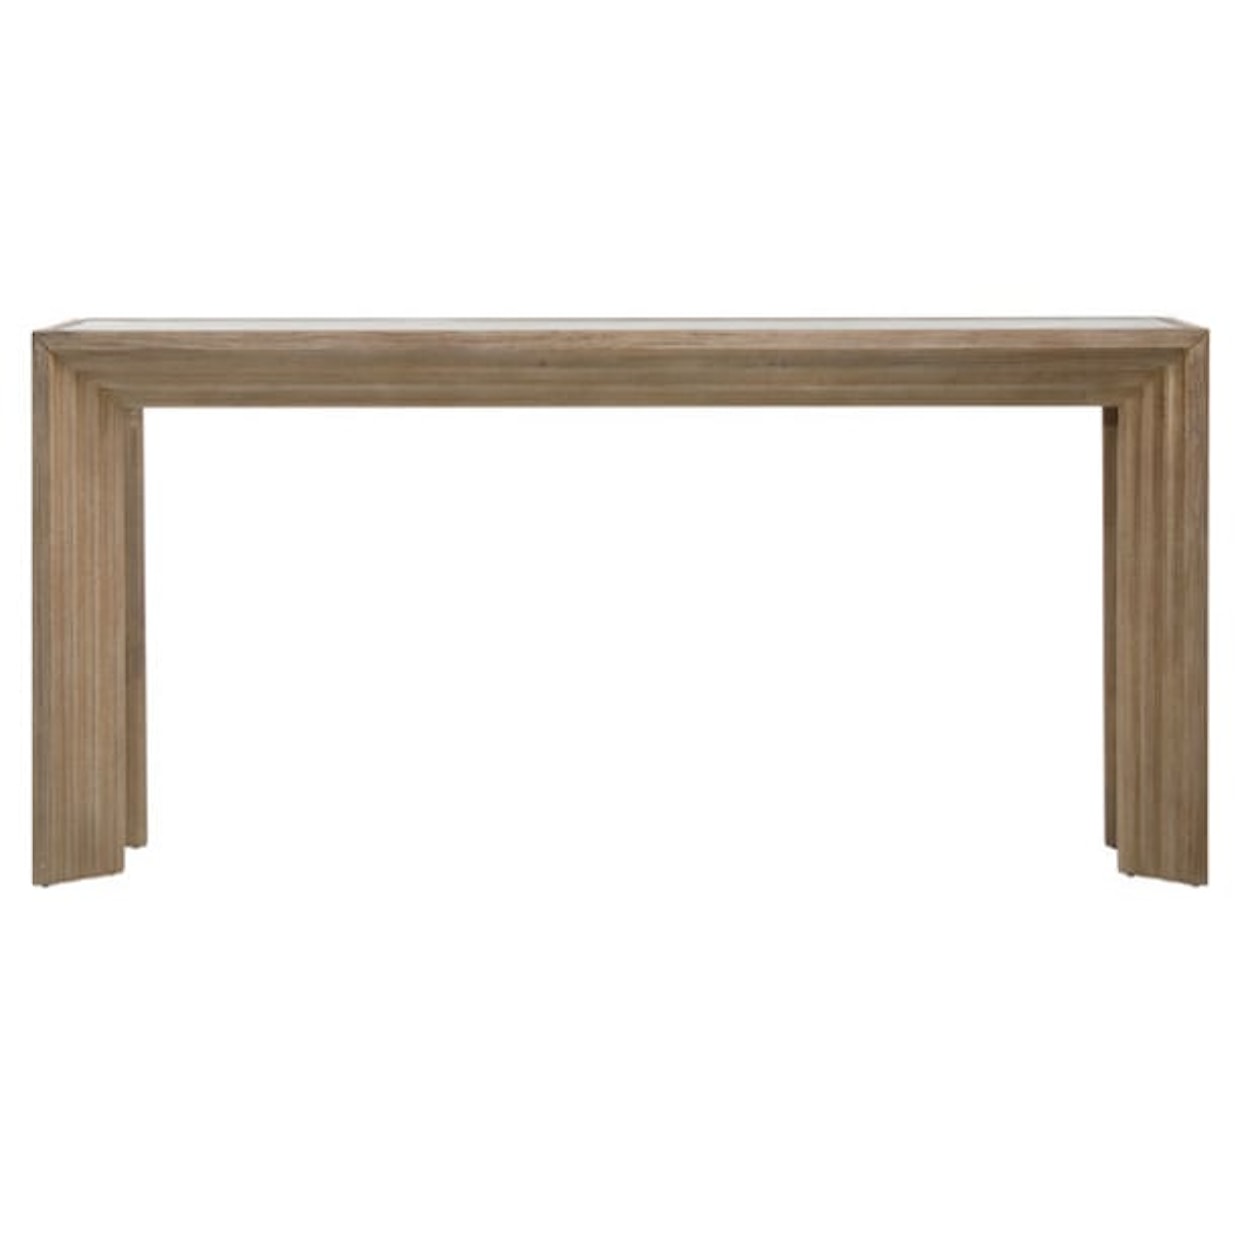 Dovetail Furniture Dovetail Accessories Marva Console Table